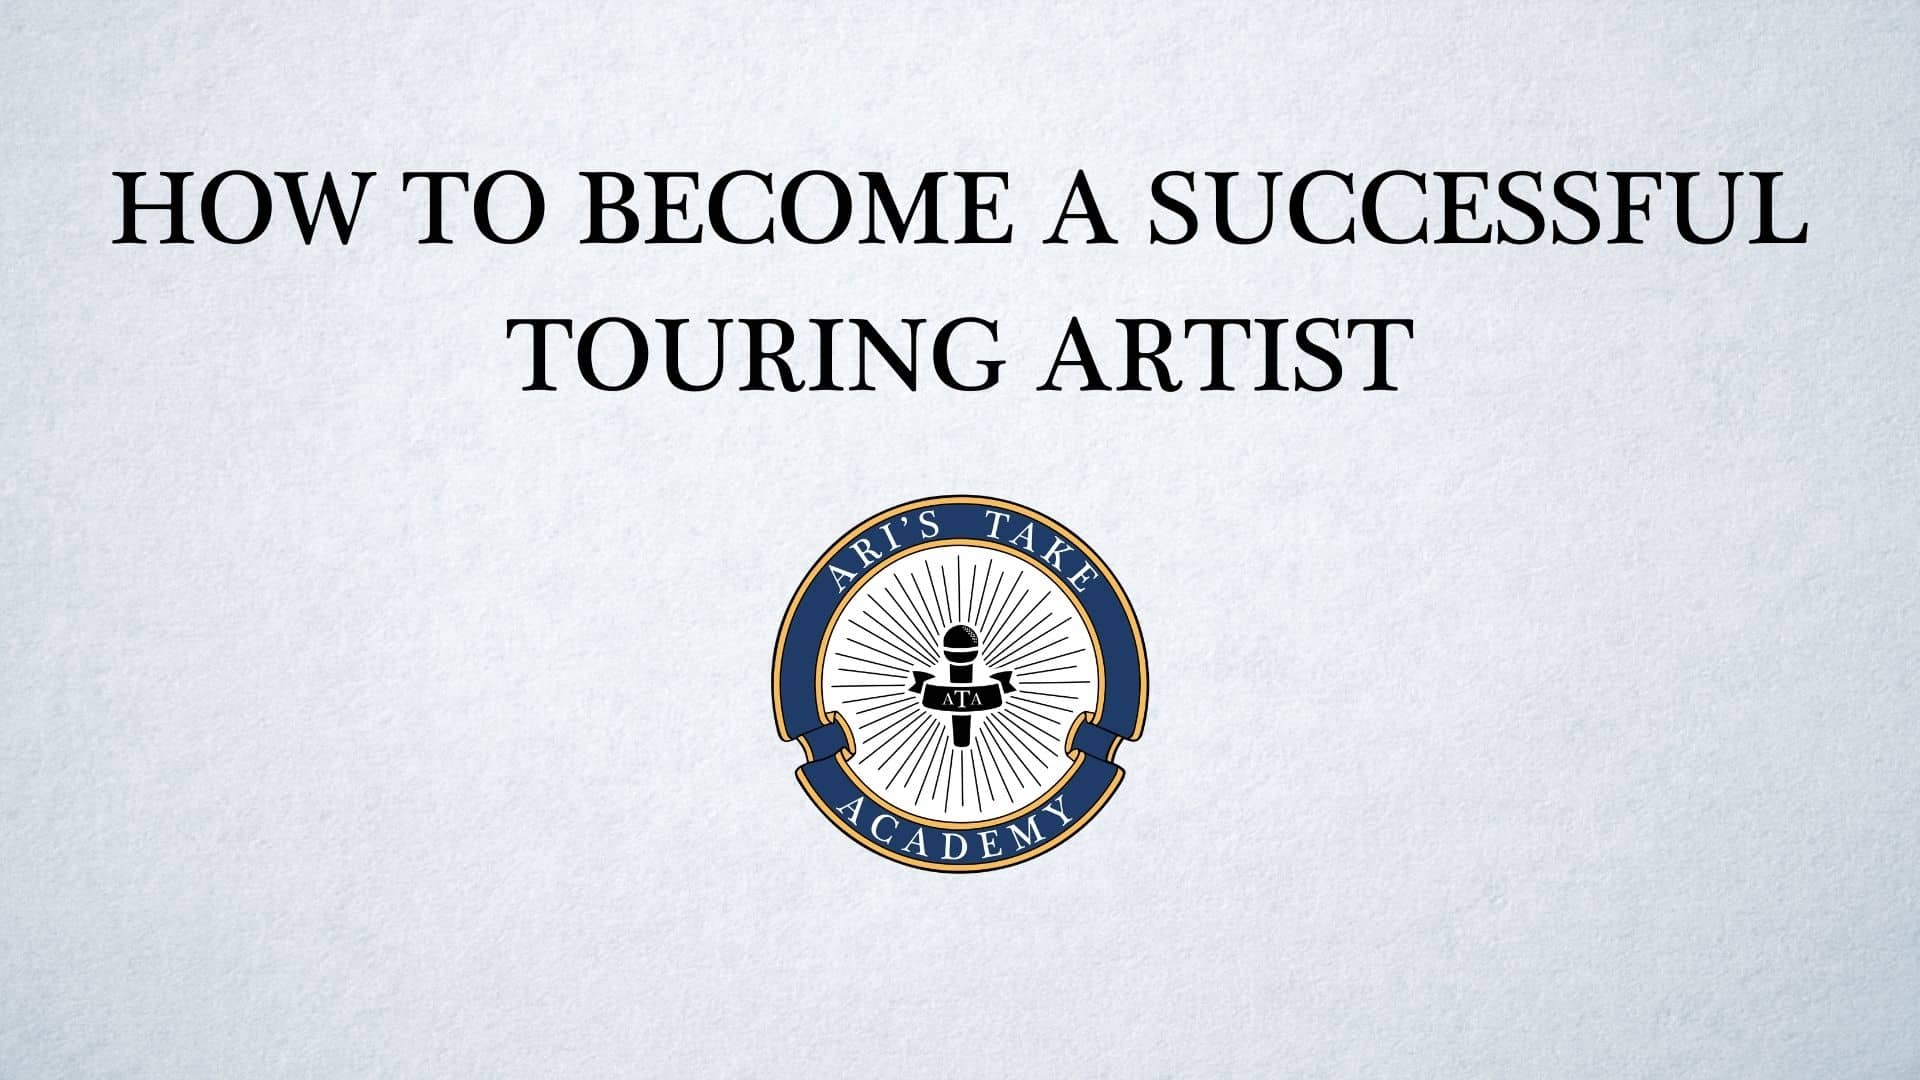 How to Become a Successful Touring Artist